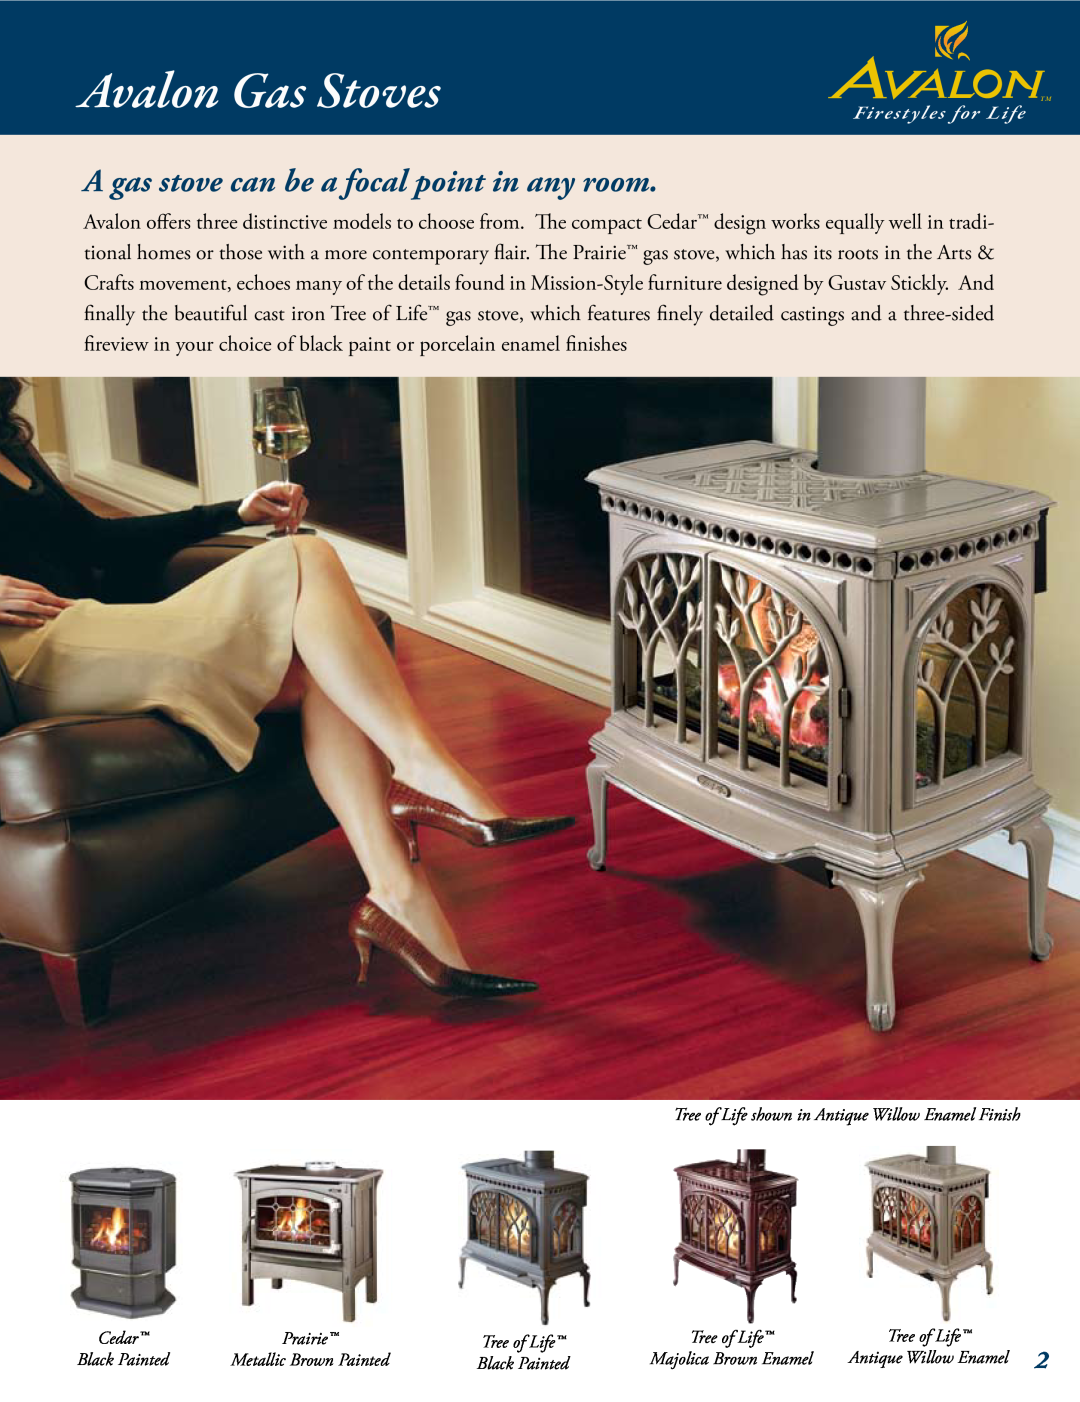 Avalon Stoves Gas Stove & Fireplace manual Avalon Gas Stoves, A gas stove can be a focal point in any room 